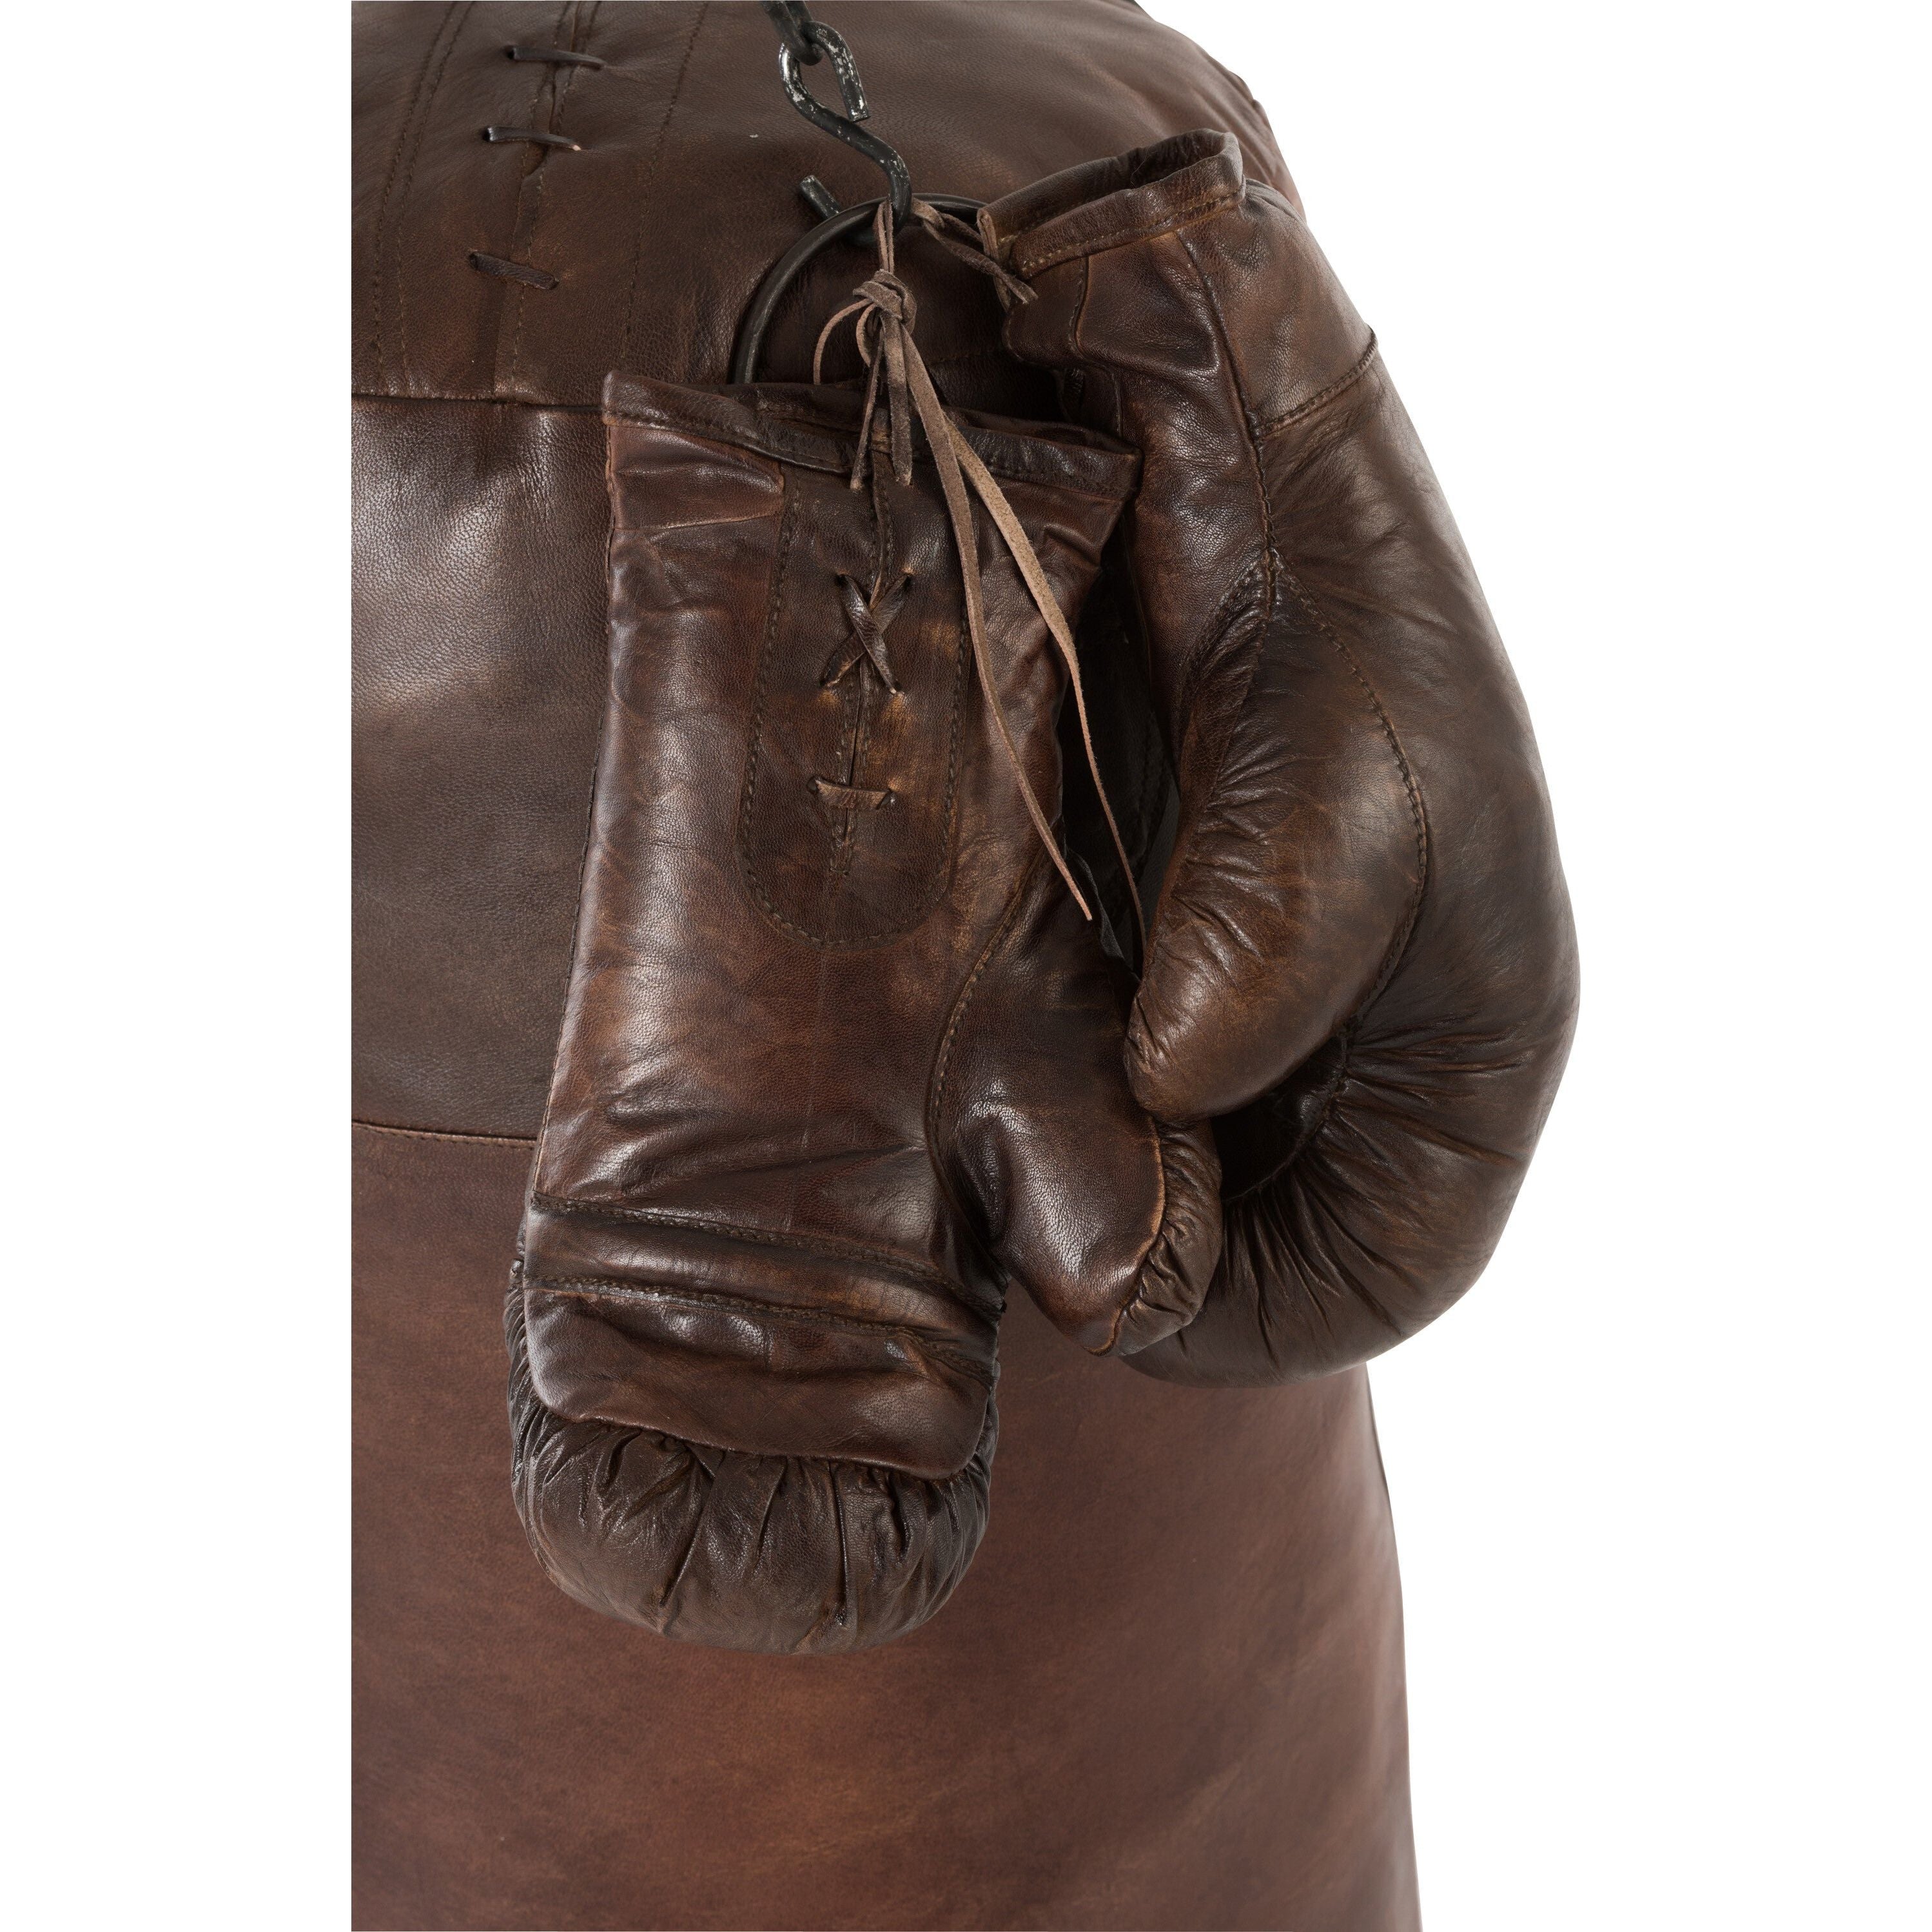 Boxing Gloves Leather Brown